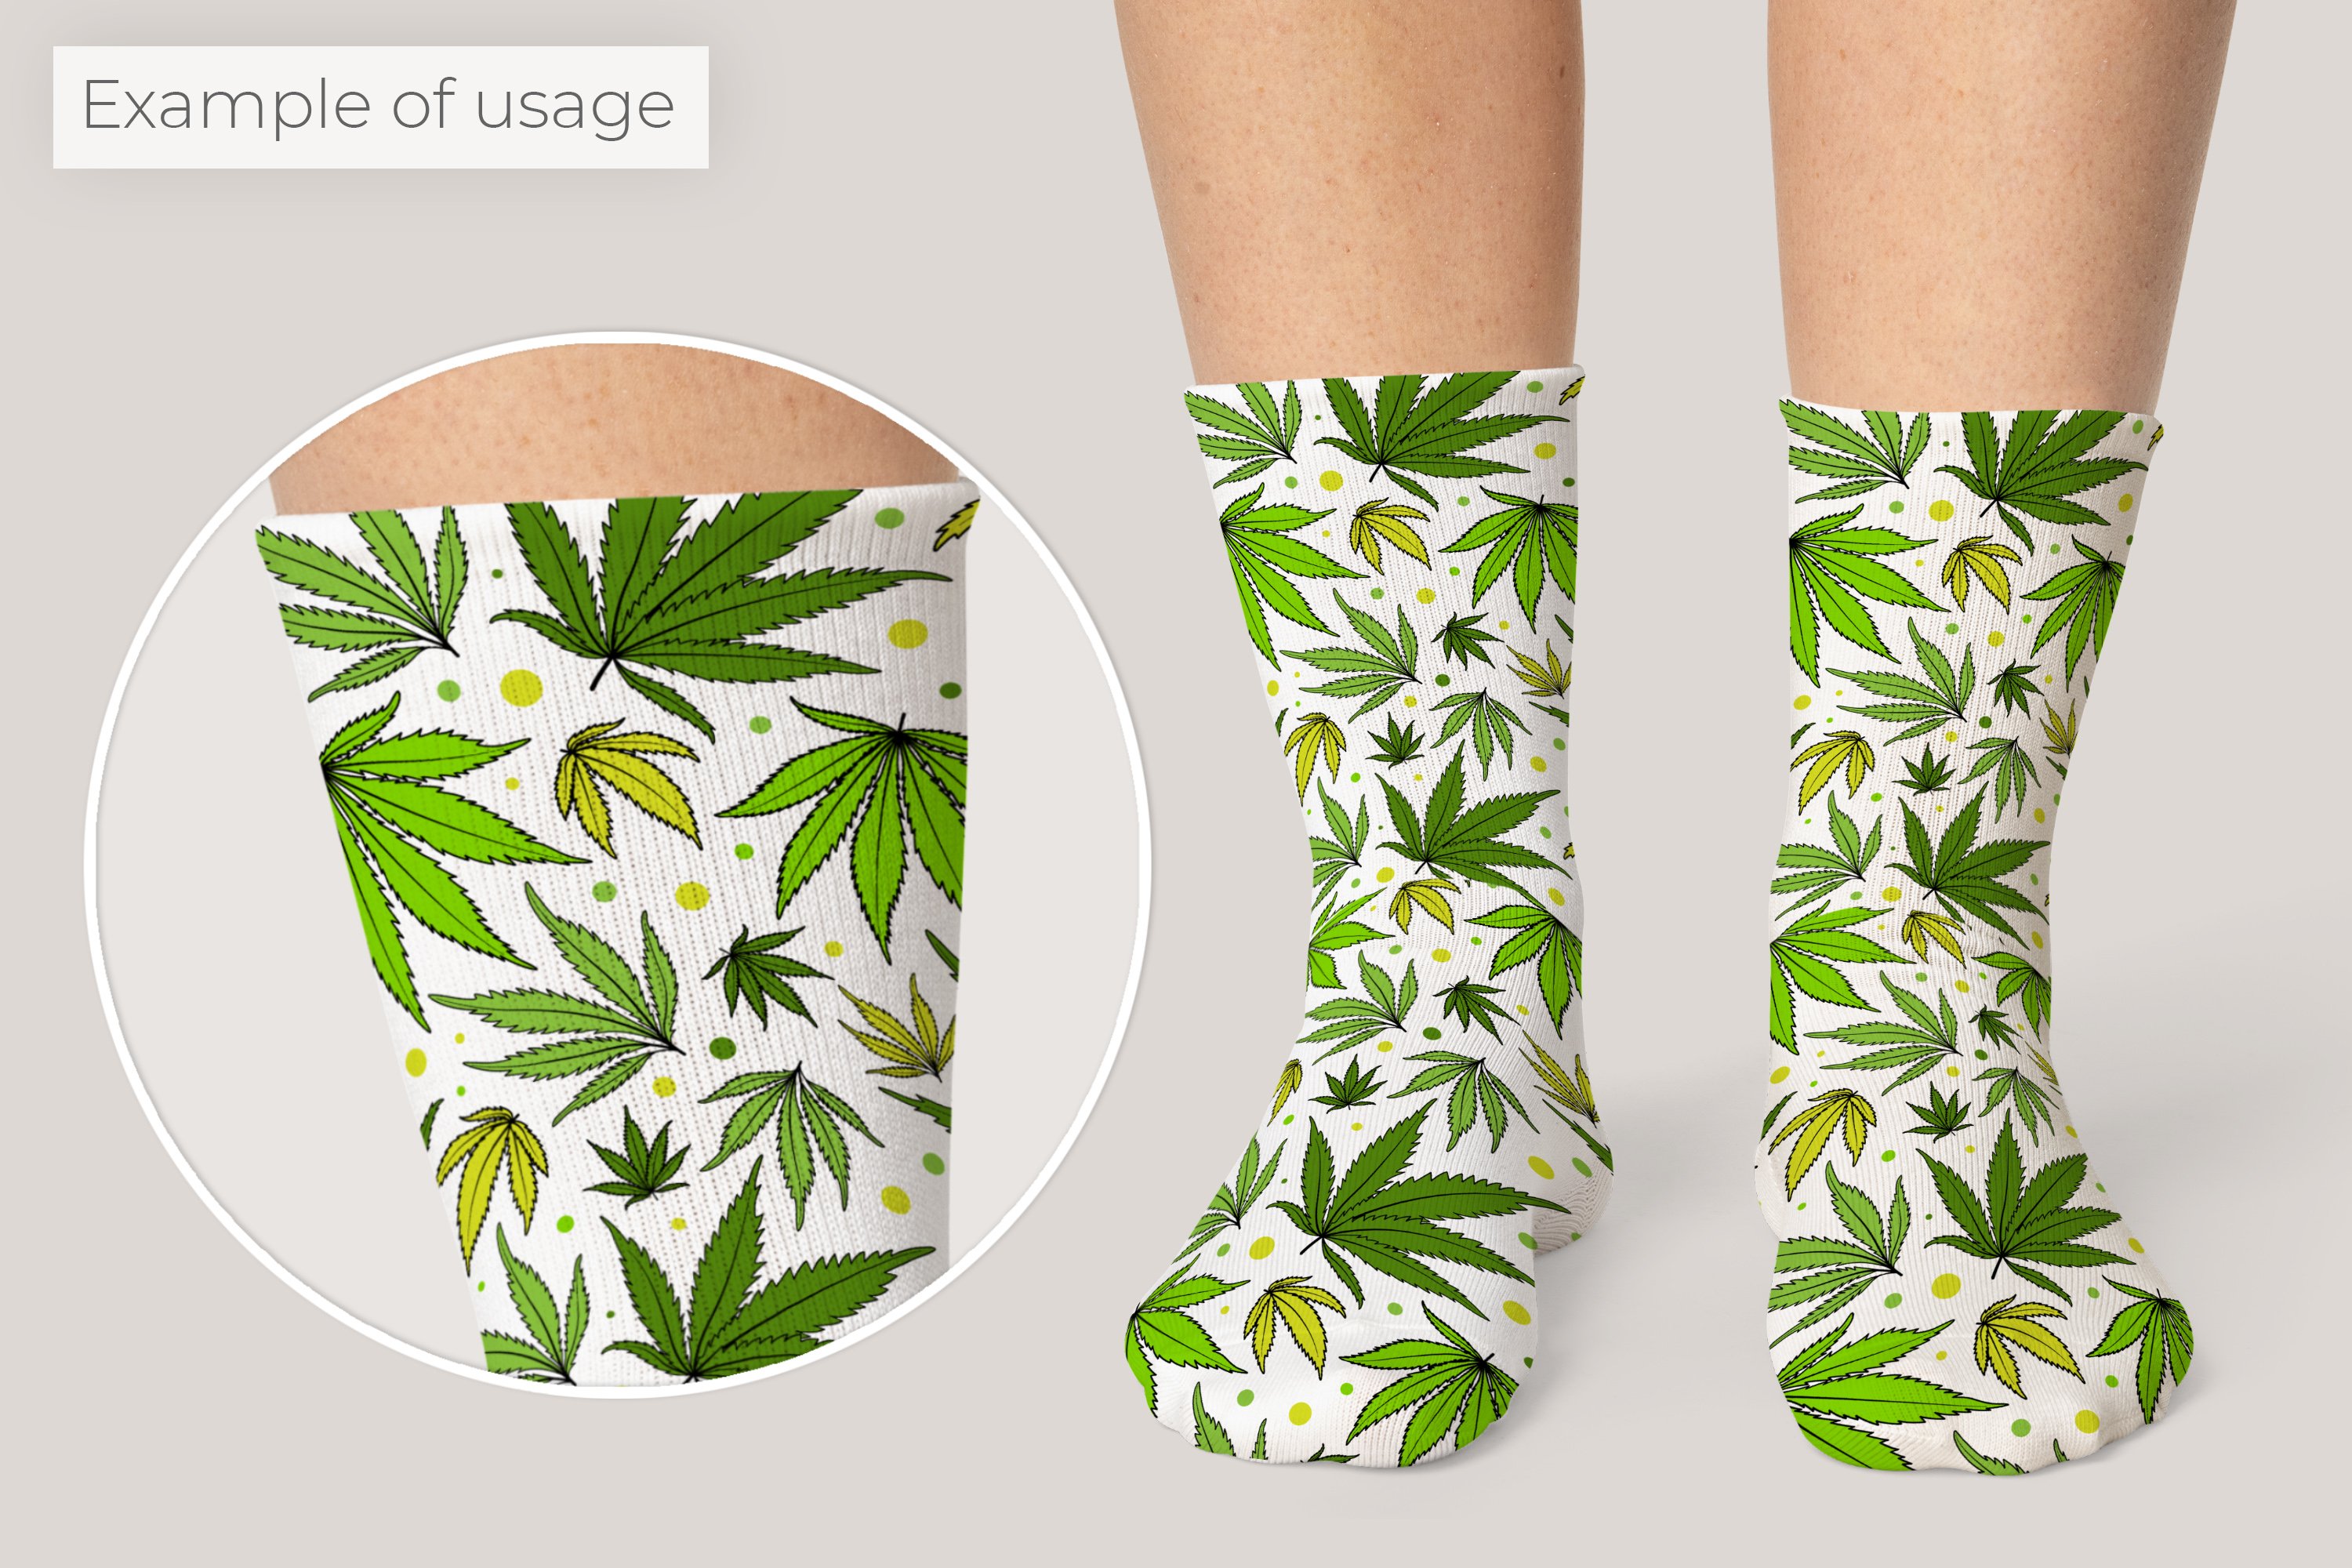 Example of usage - socks with cannabis.